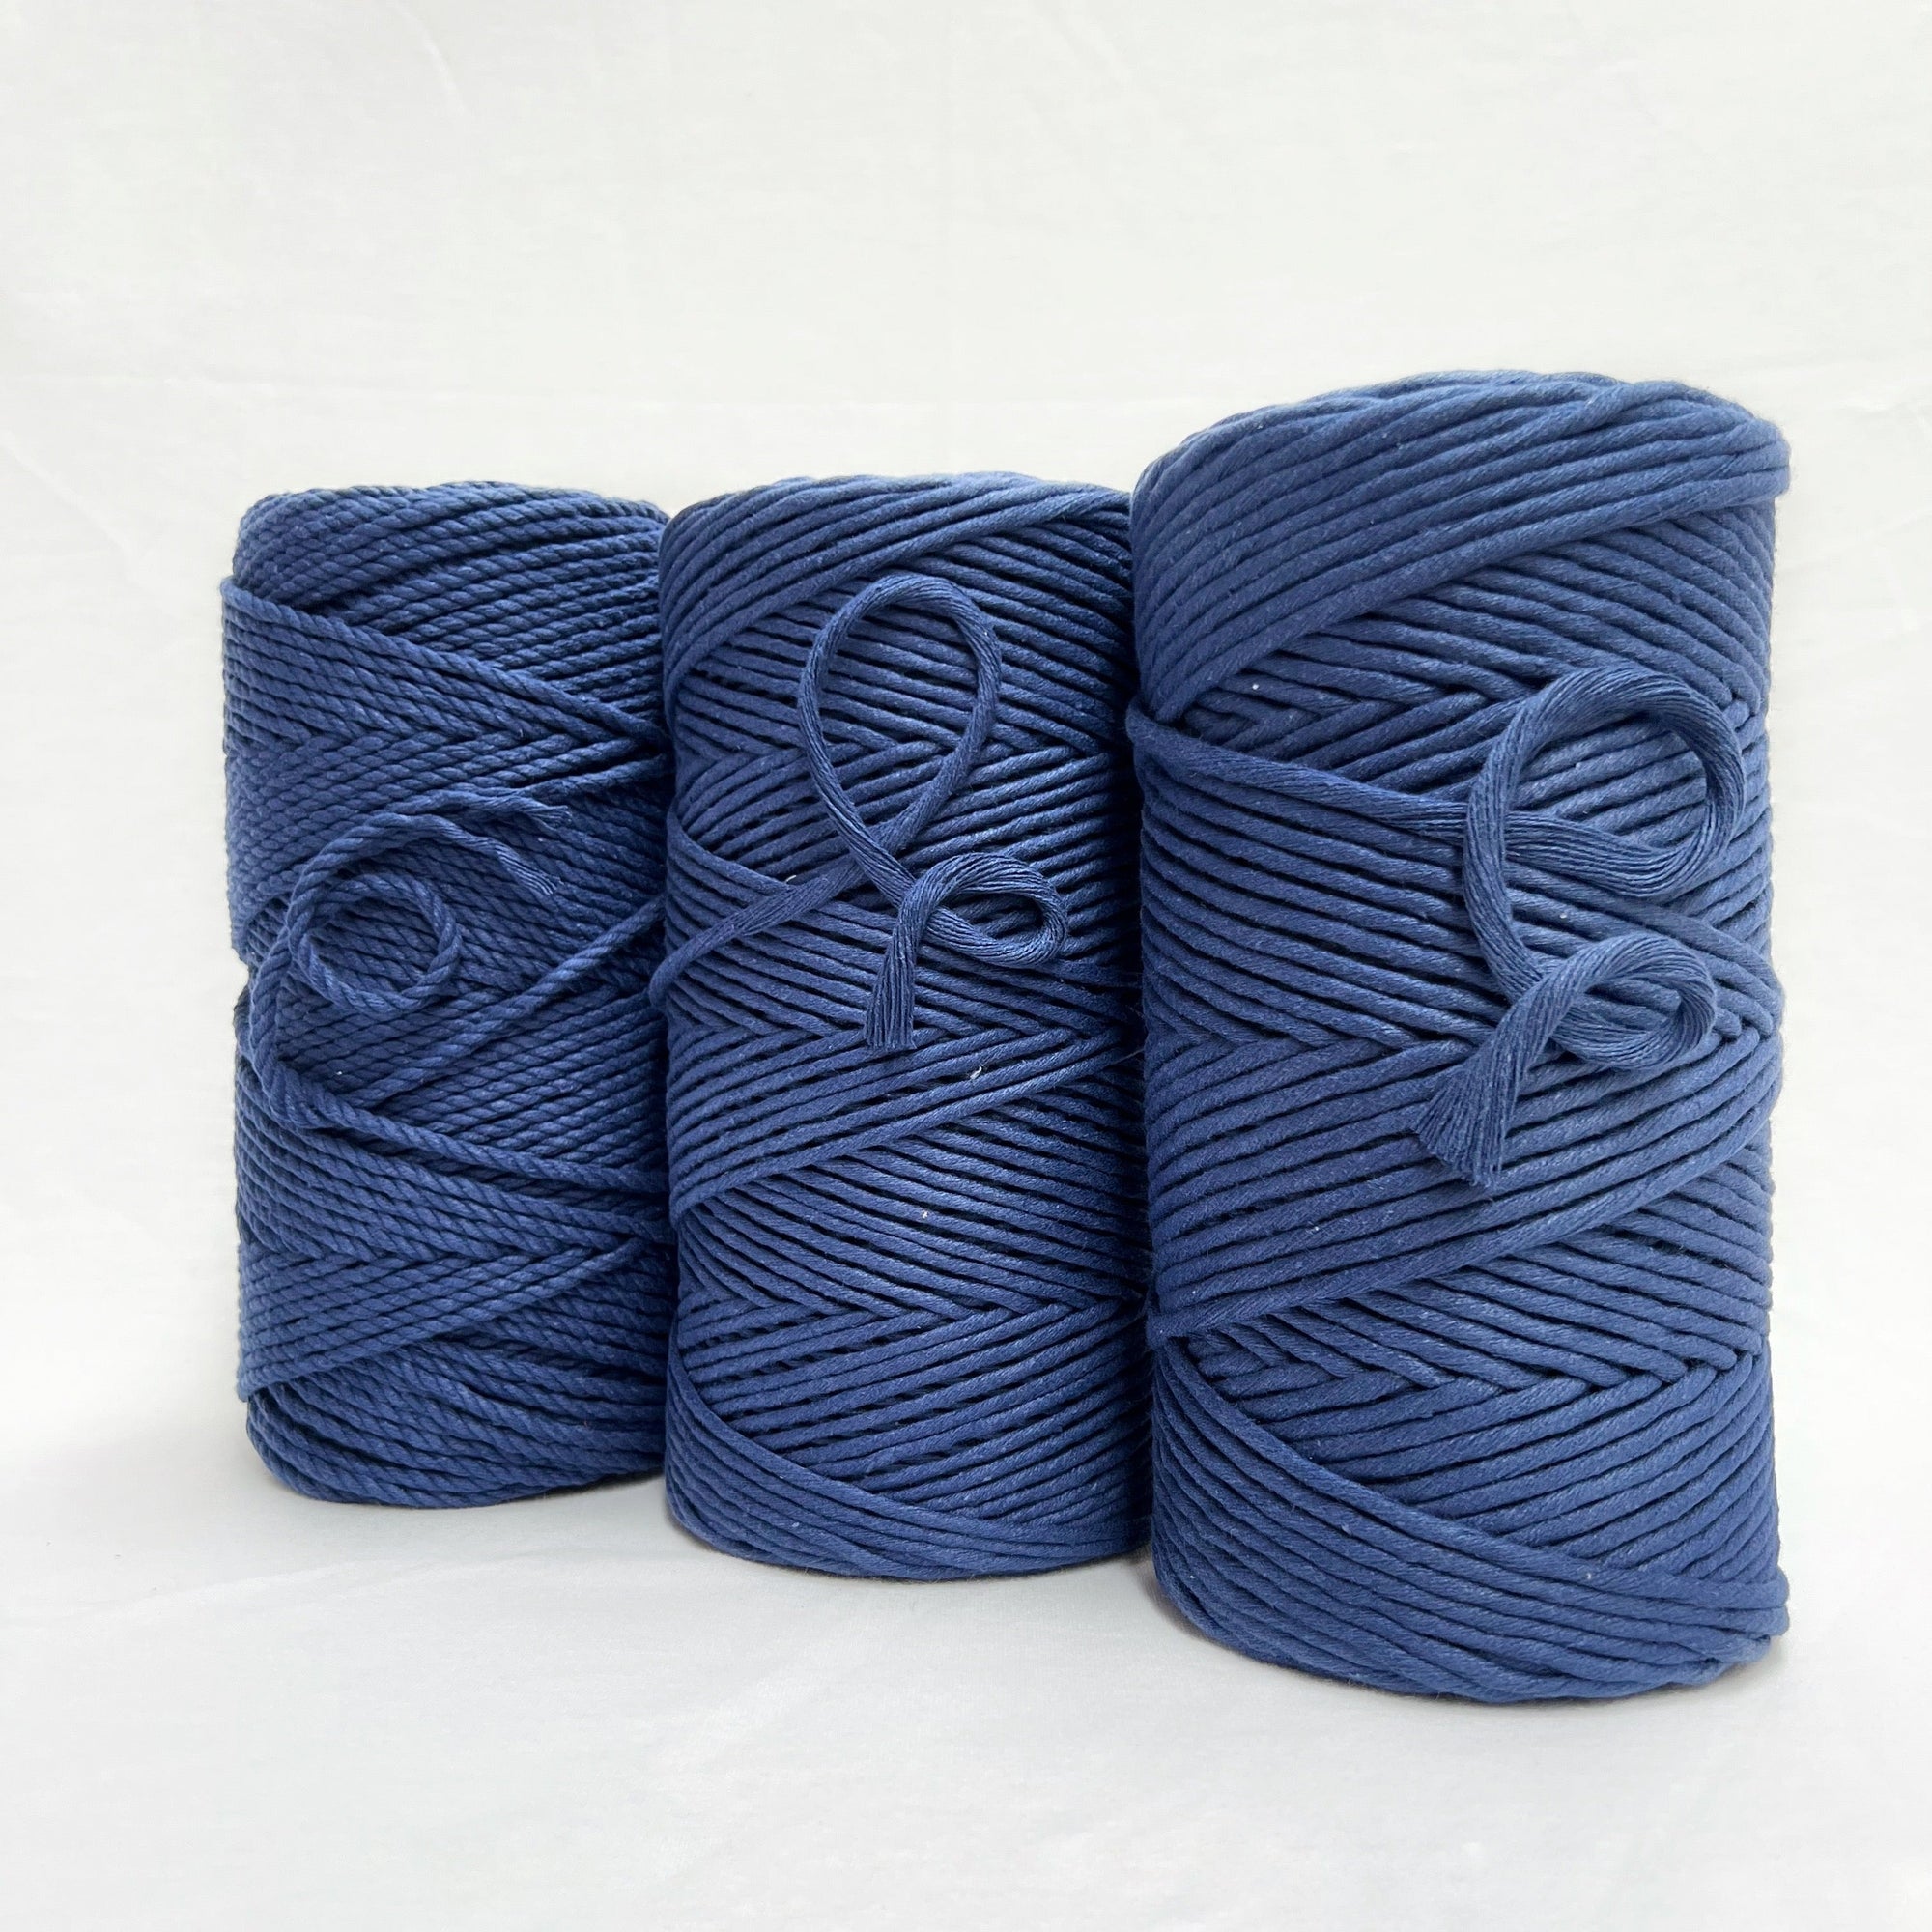 mary maker studio 1kg 4mm recycled cotton macrame rope in deep blue depths colour suitable for macrame workshops beginners and advanced artists